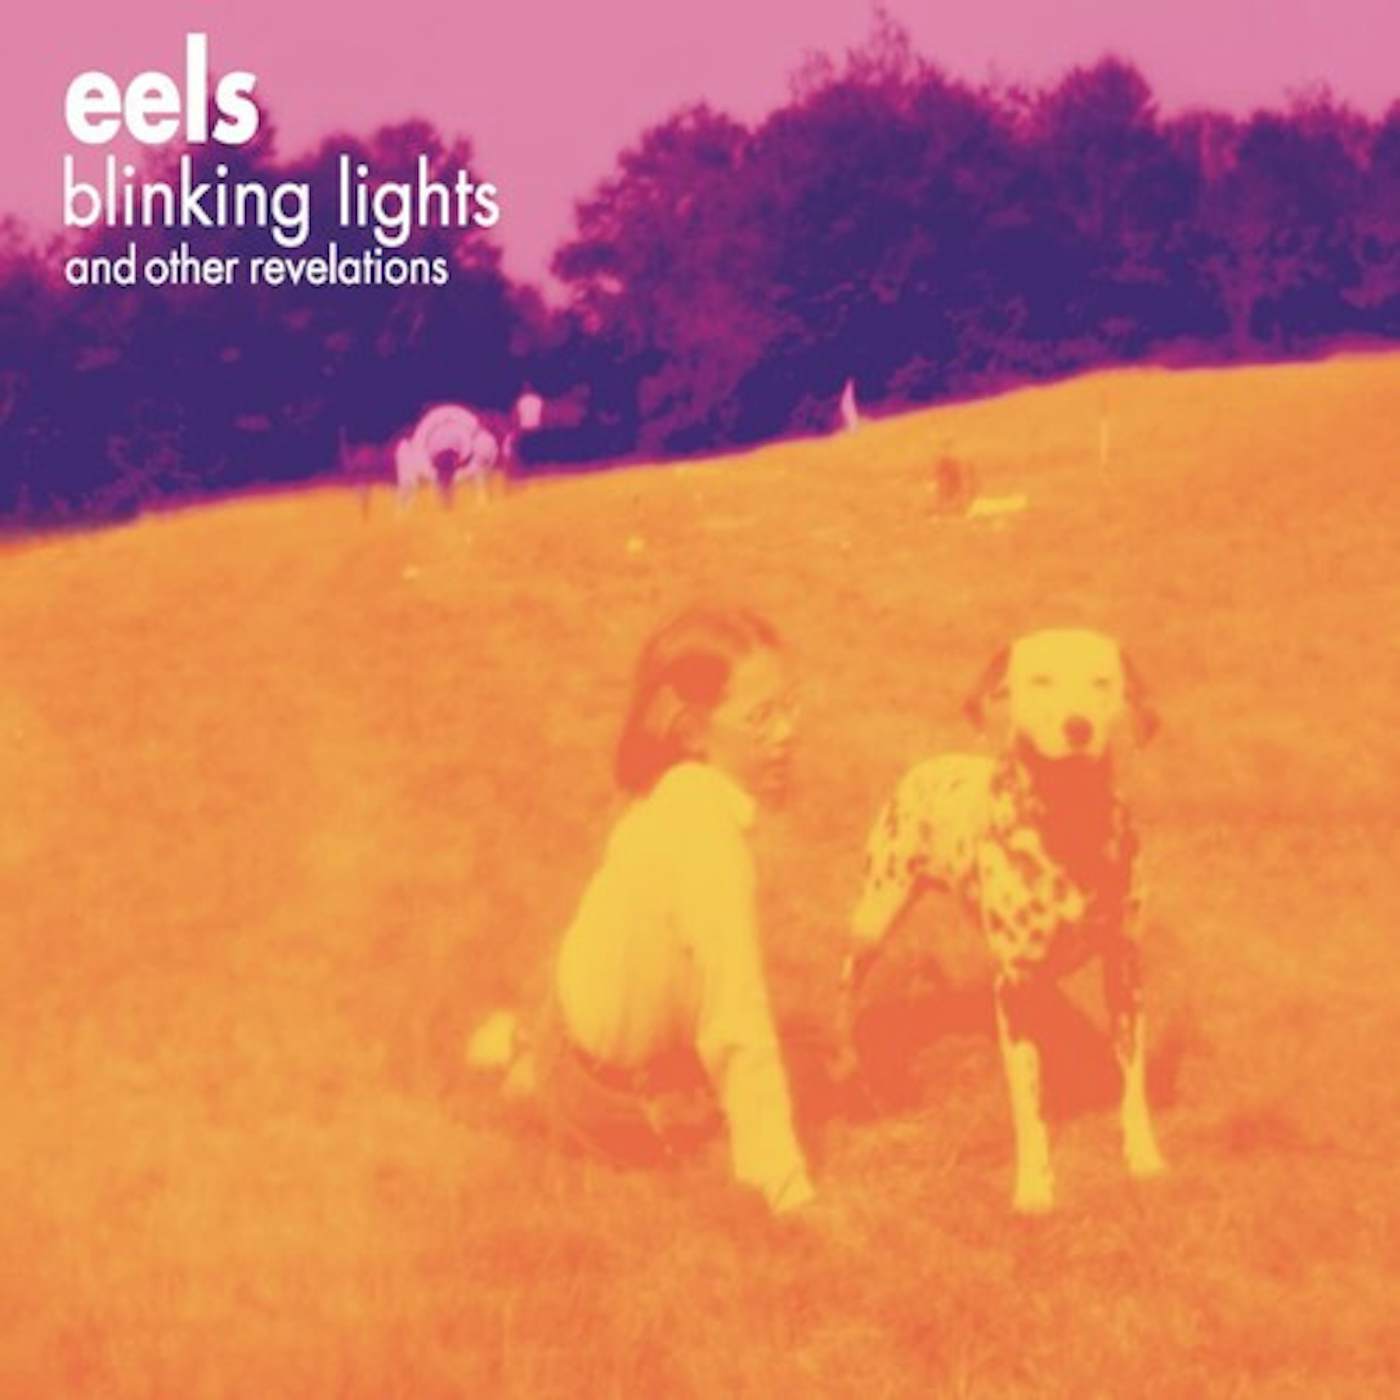 Eels Blinking Lights And Other Revelations (3LP) Vinyl Record